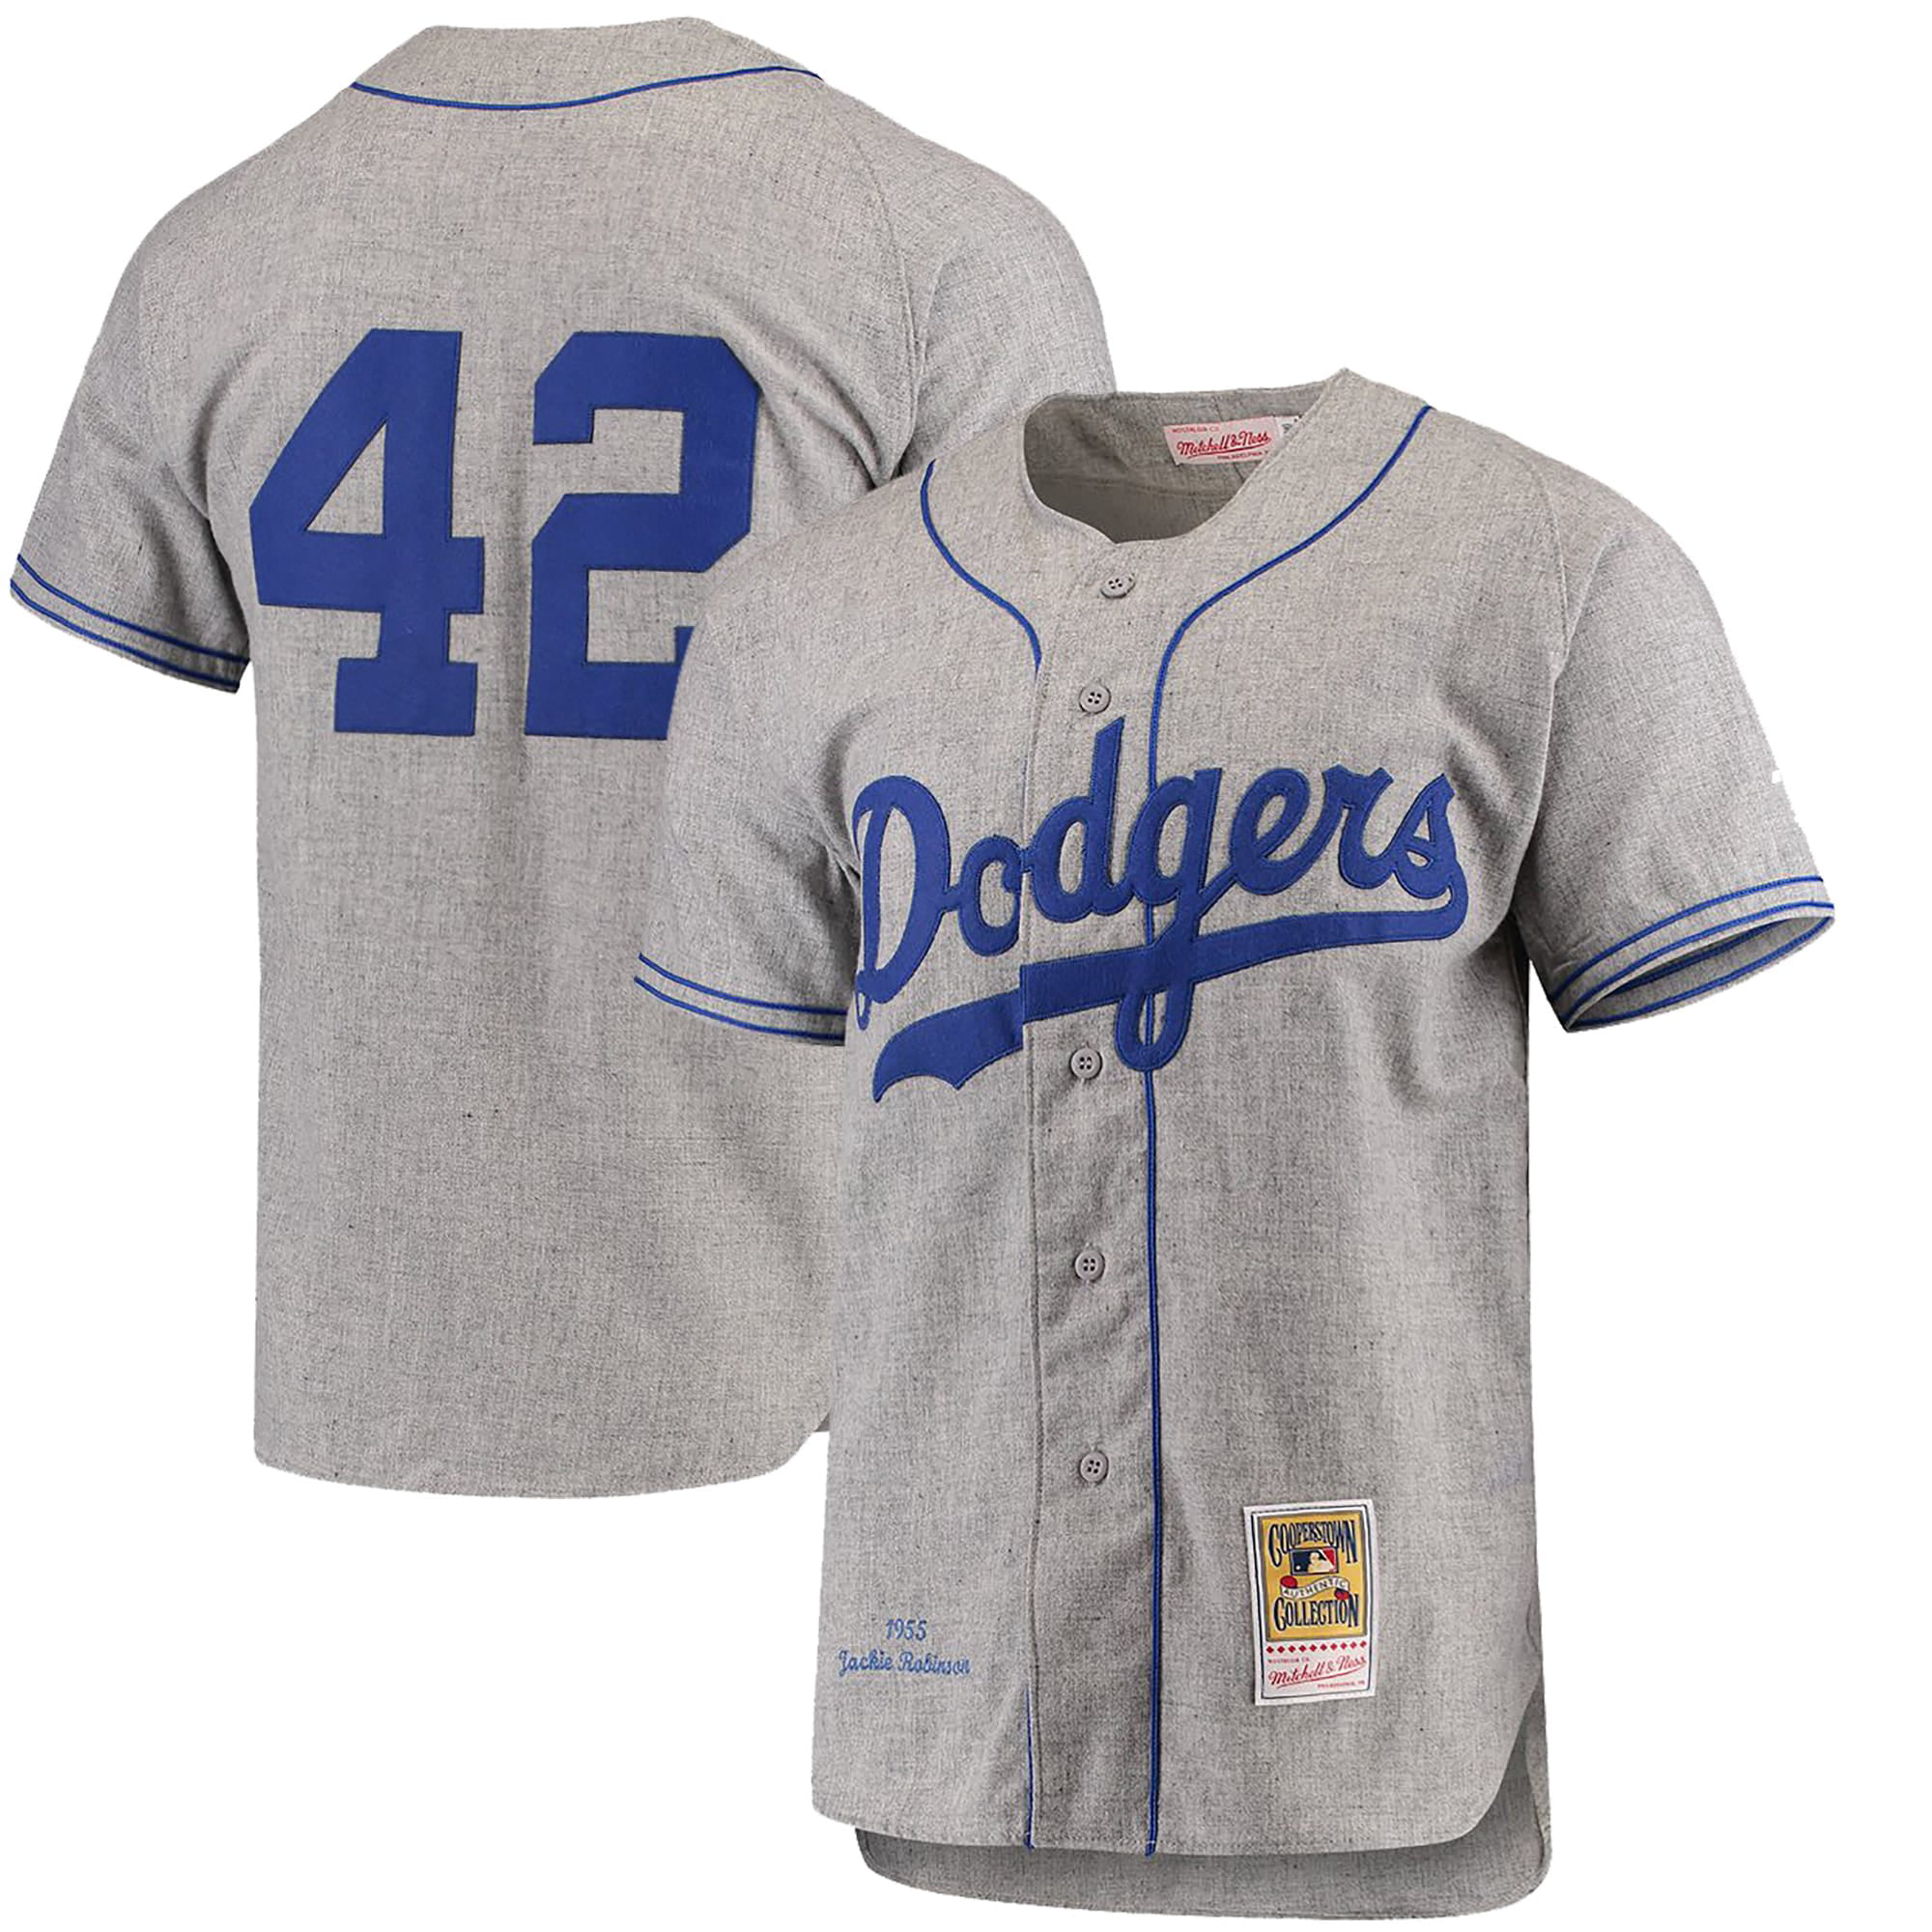 Men's Nike Jackie Robinson Brooklyn Dodgers Cooperstown Collection Light  Blue Jersey